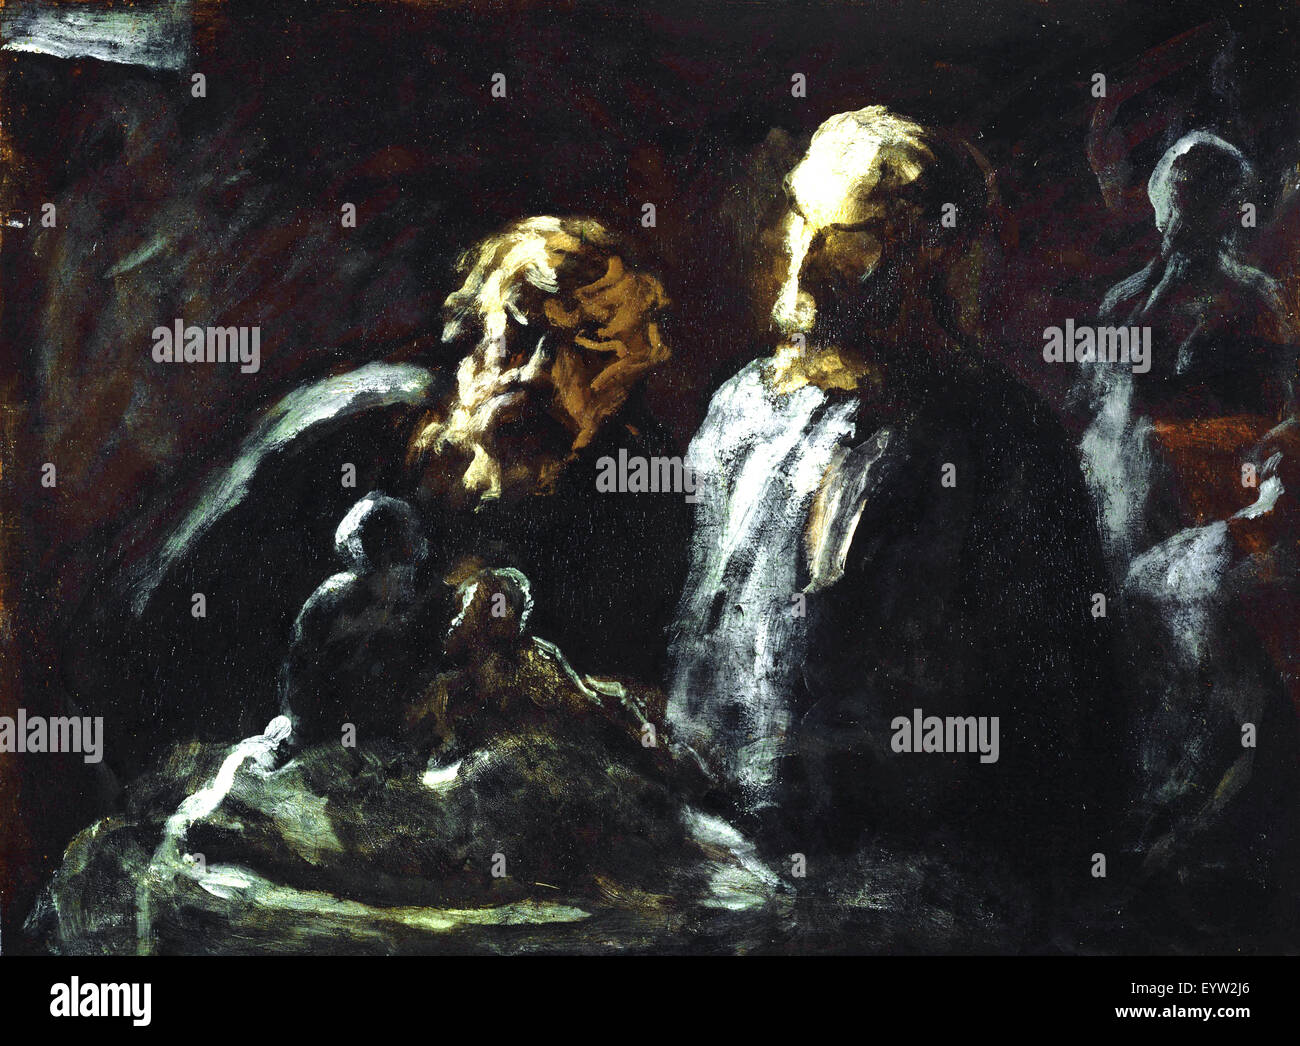 Honore Daumier, Two Sculptors 1870-1873 Oil on panel. The Phillips Collection, Washington, D.C., USA. Stock Photo